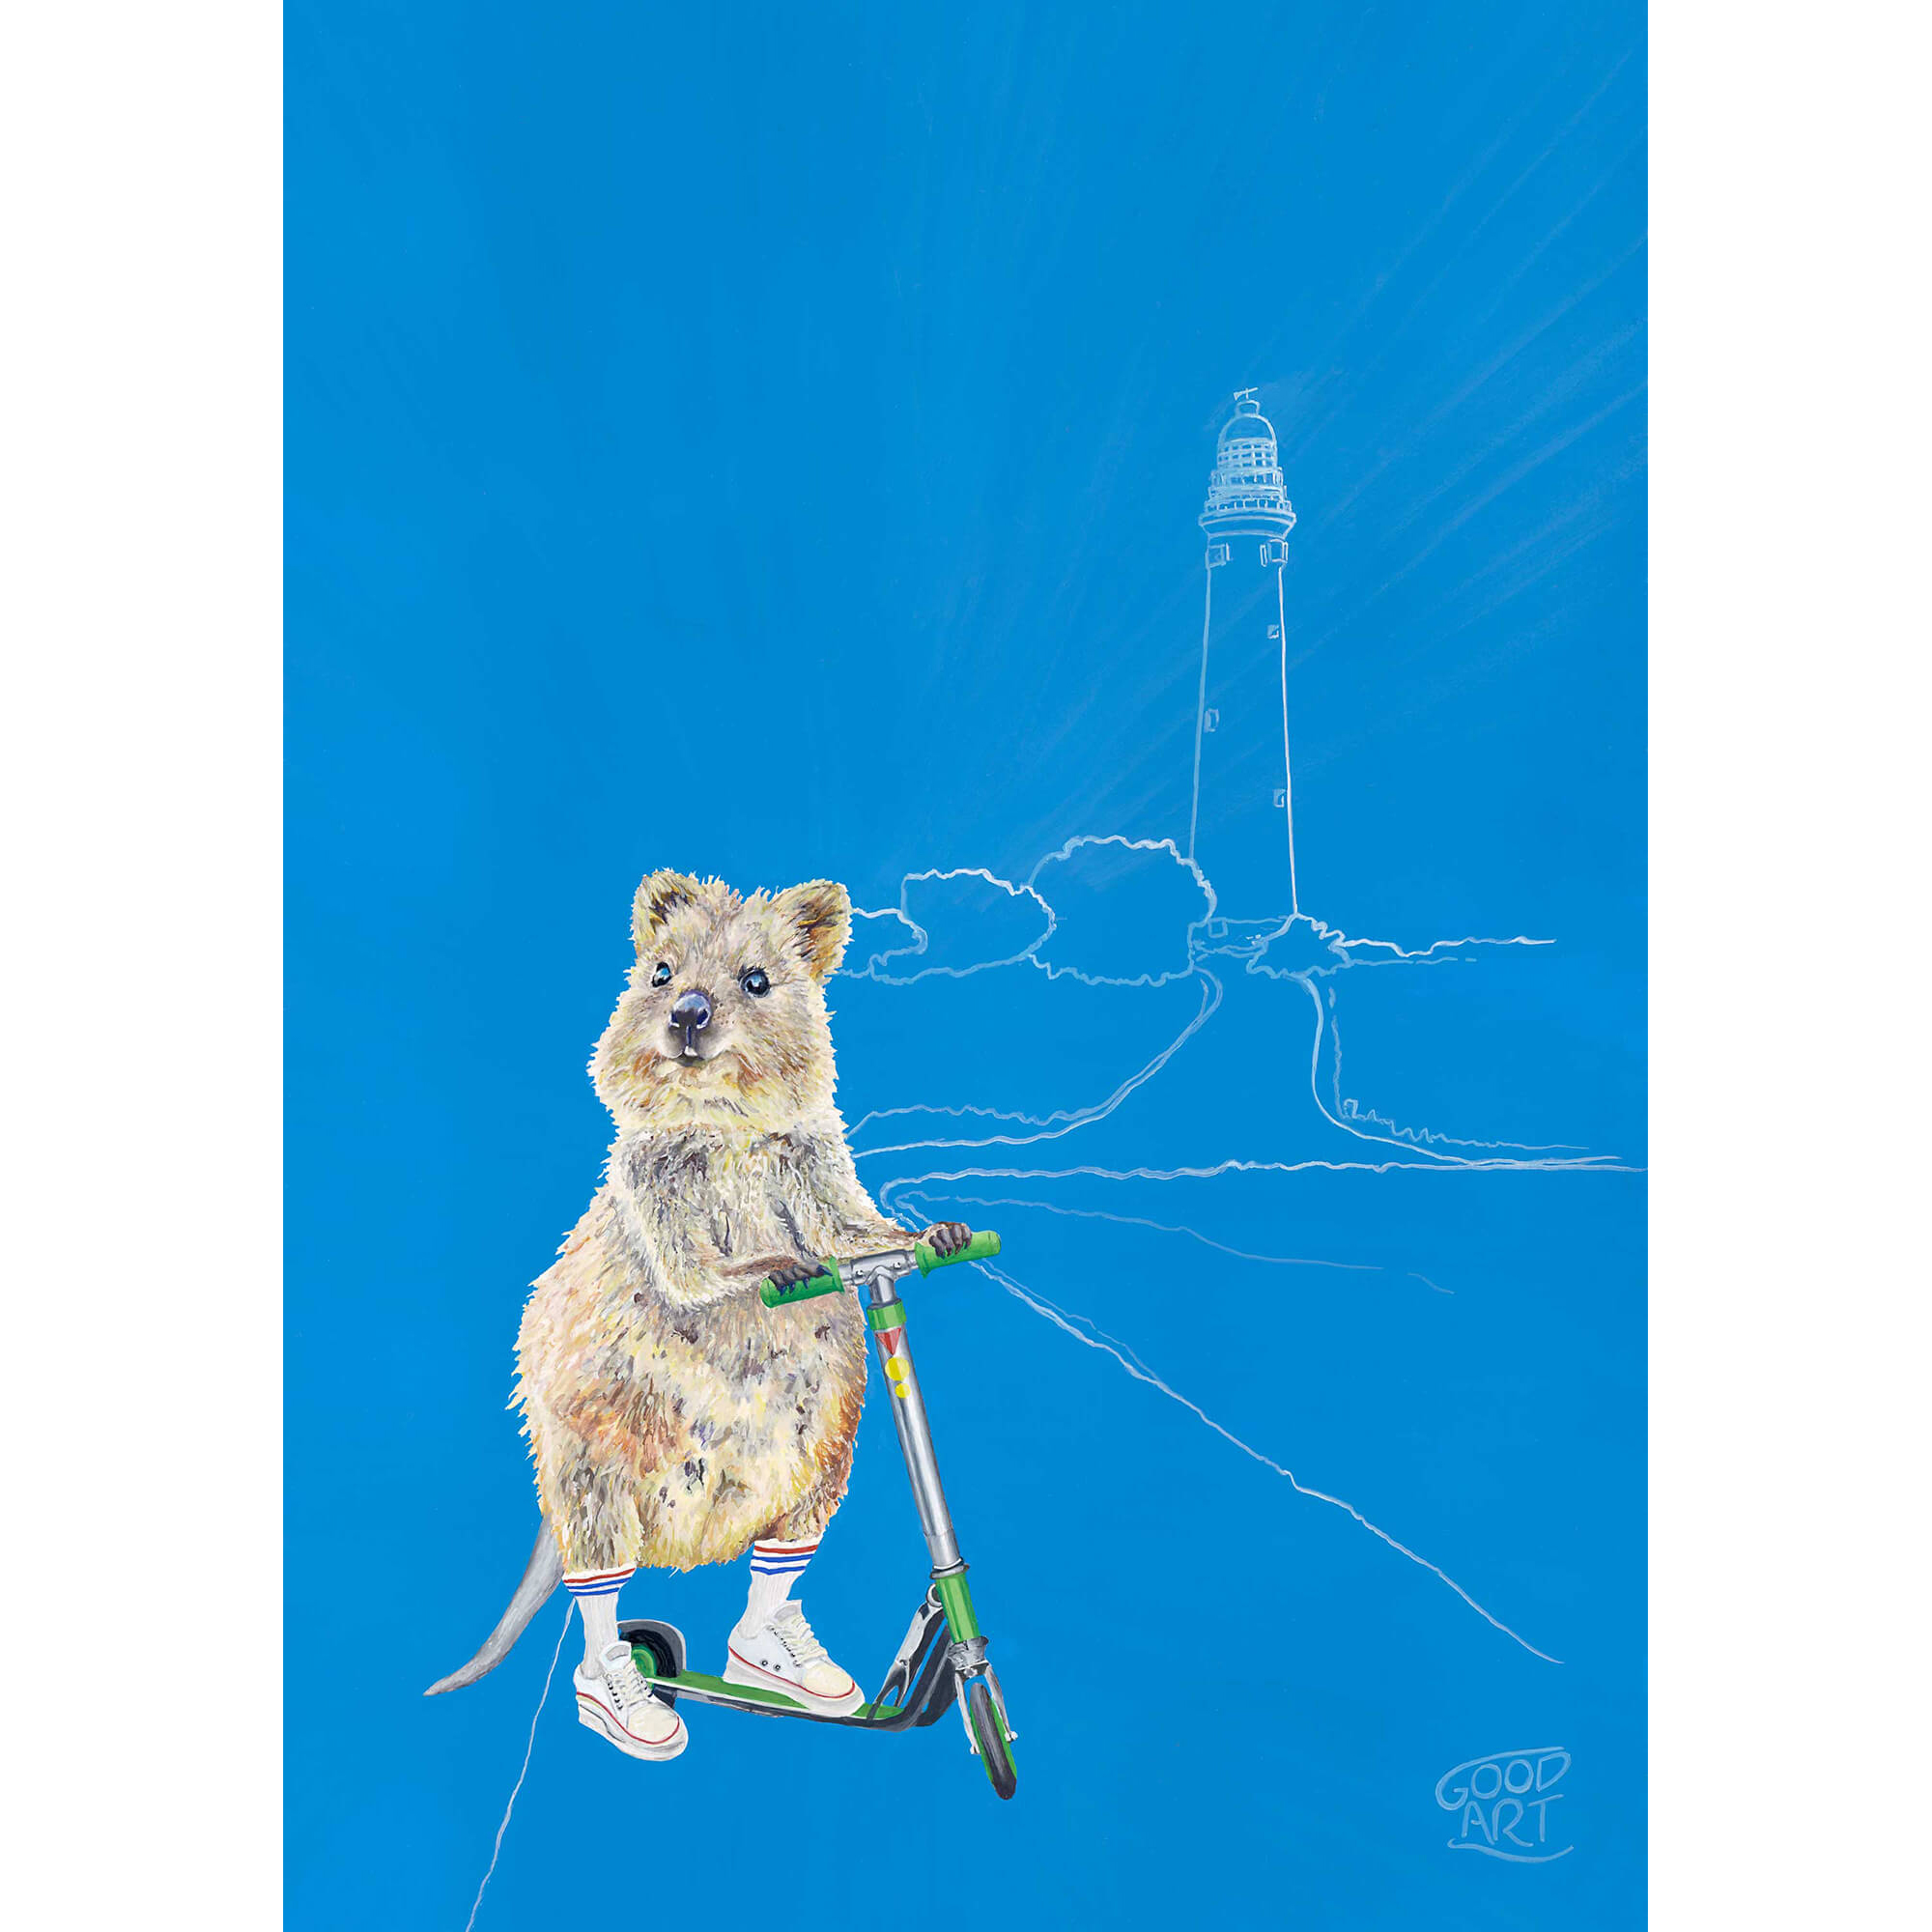 Wall Art for boys created by Good Art. A Western Australian Rottnest Quokka riding a scooter with lighthouse in the background. Predominantly blue background. Australiana inspired kids bedroom.